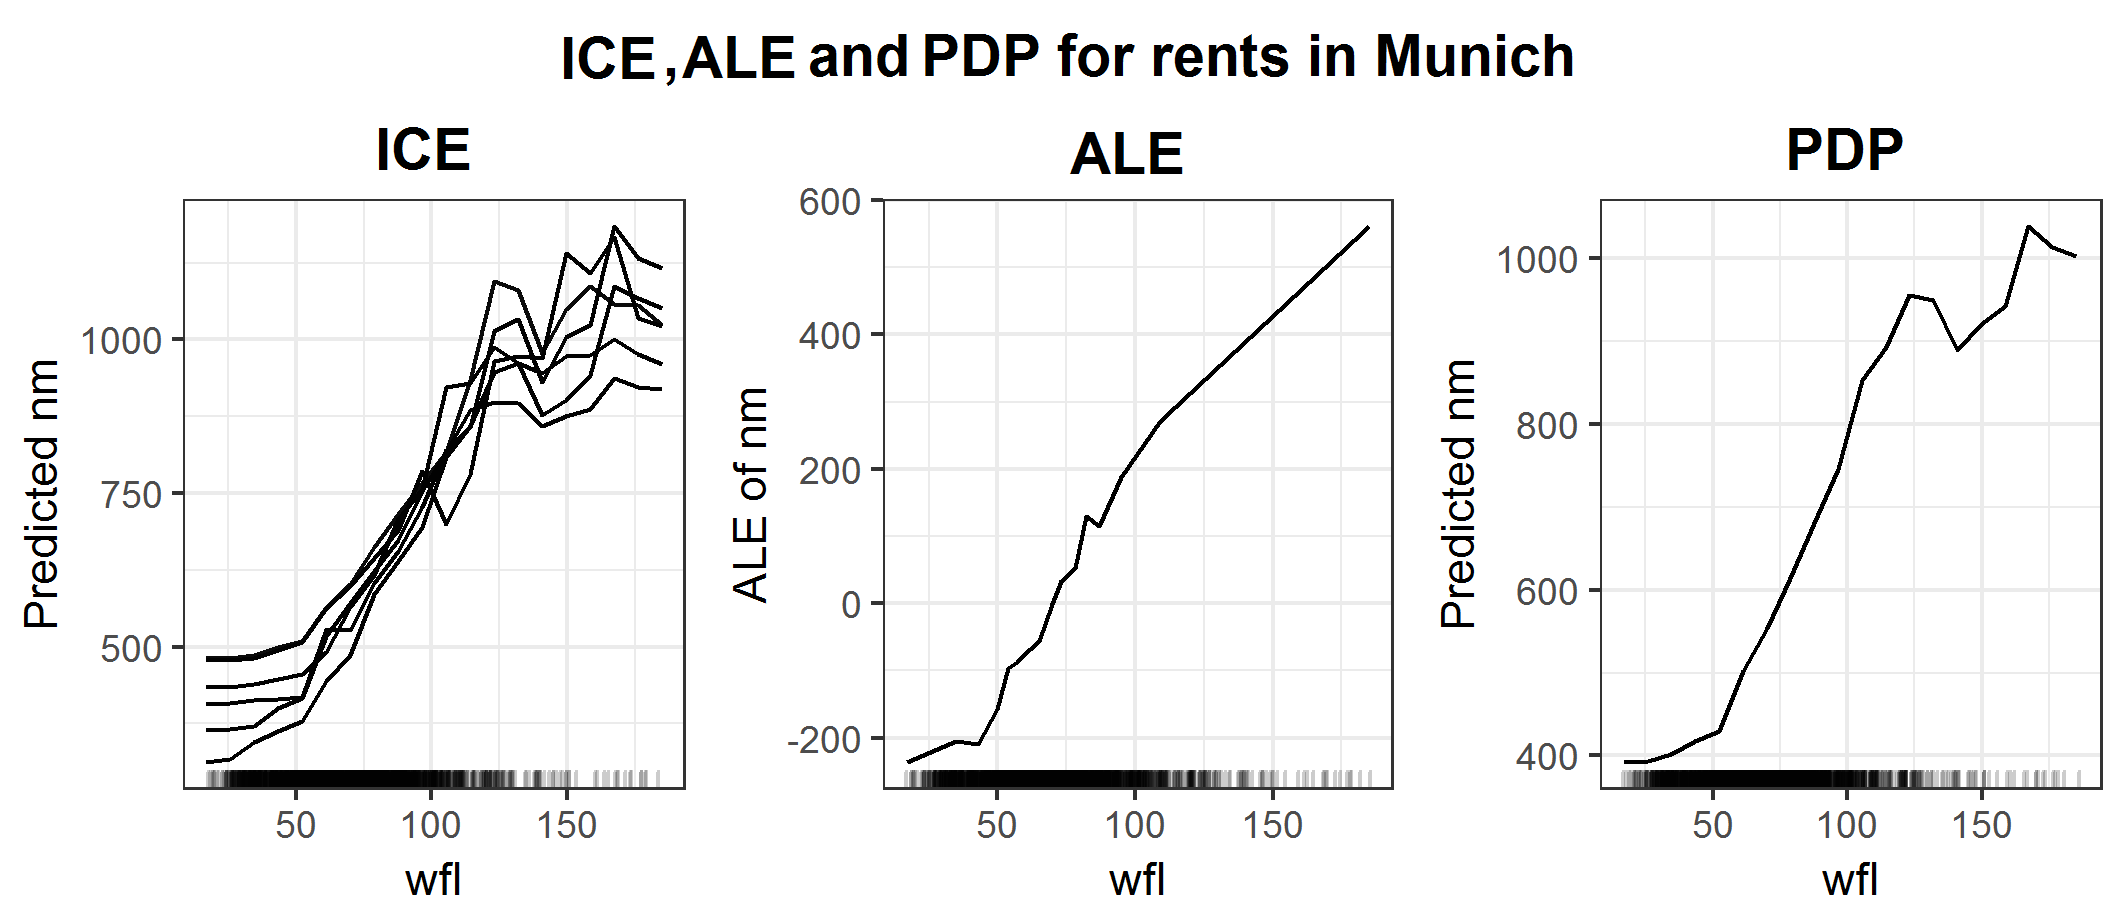 ICE, ALE and PDP plots for influence of space on rents in Munich.